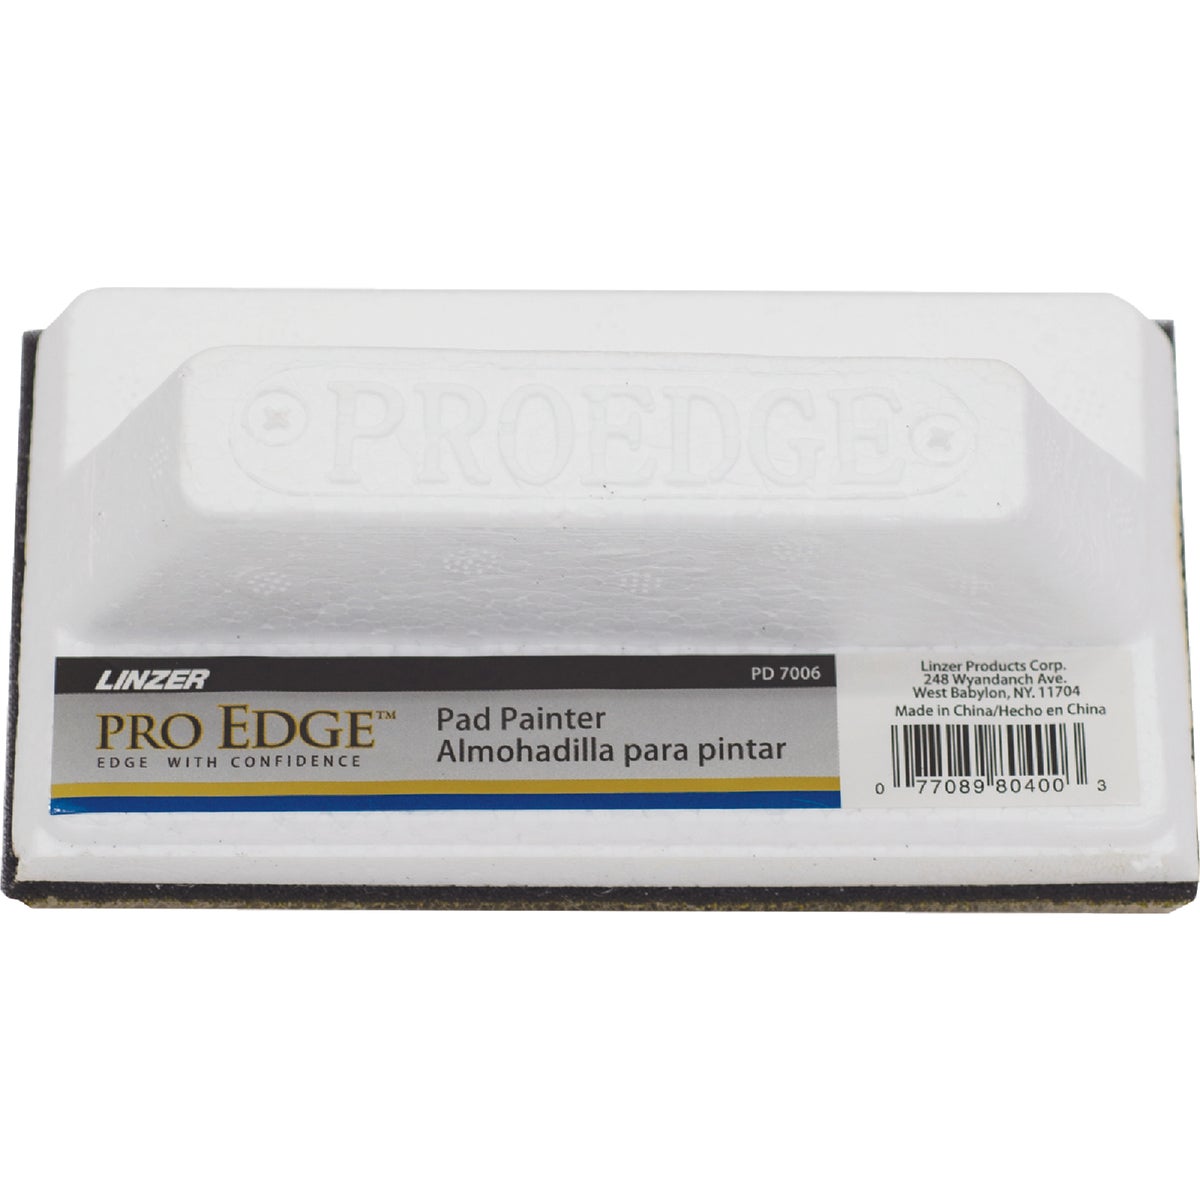 Item 790451, Disposable pad painter for use on interior smooth surfaces.